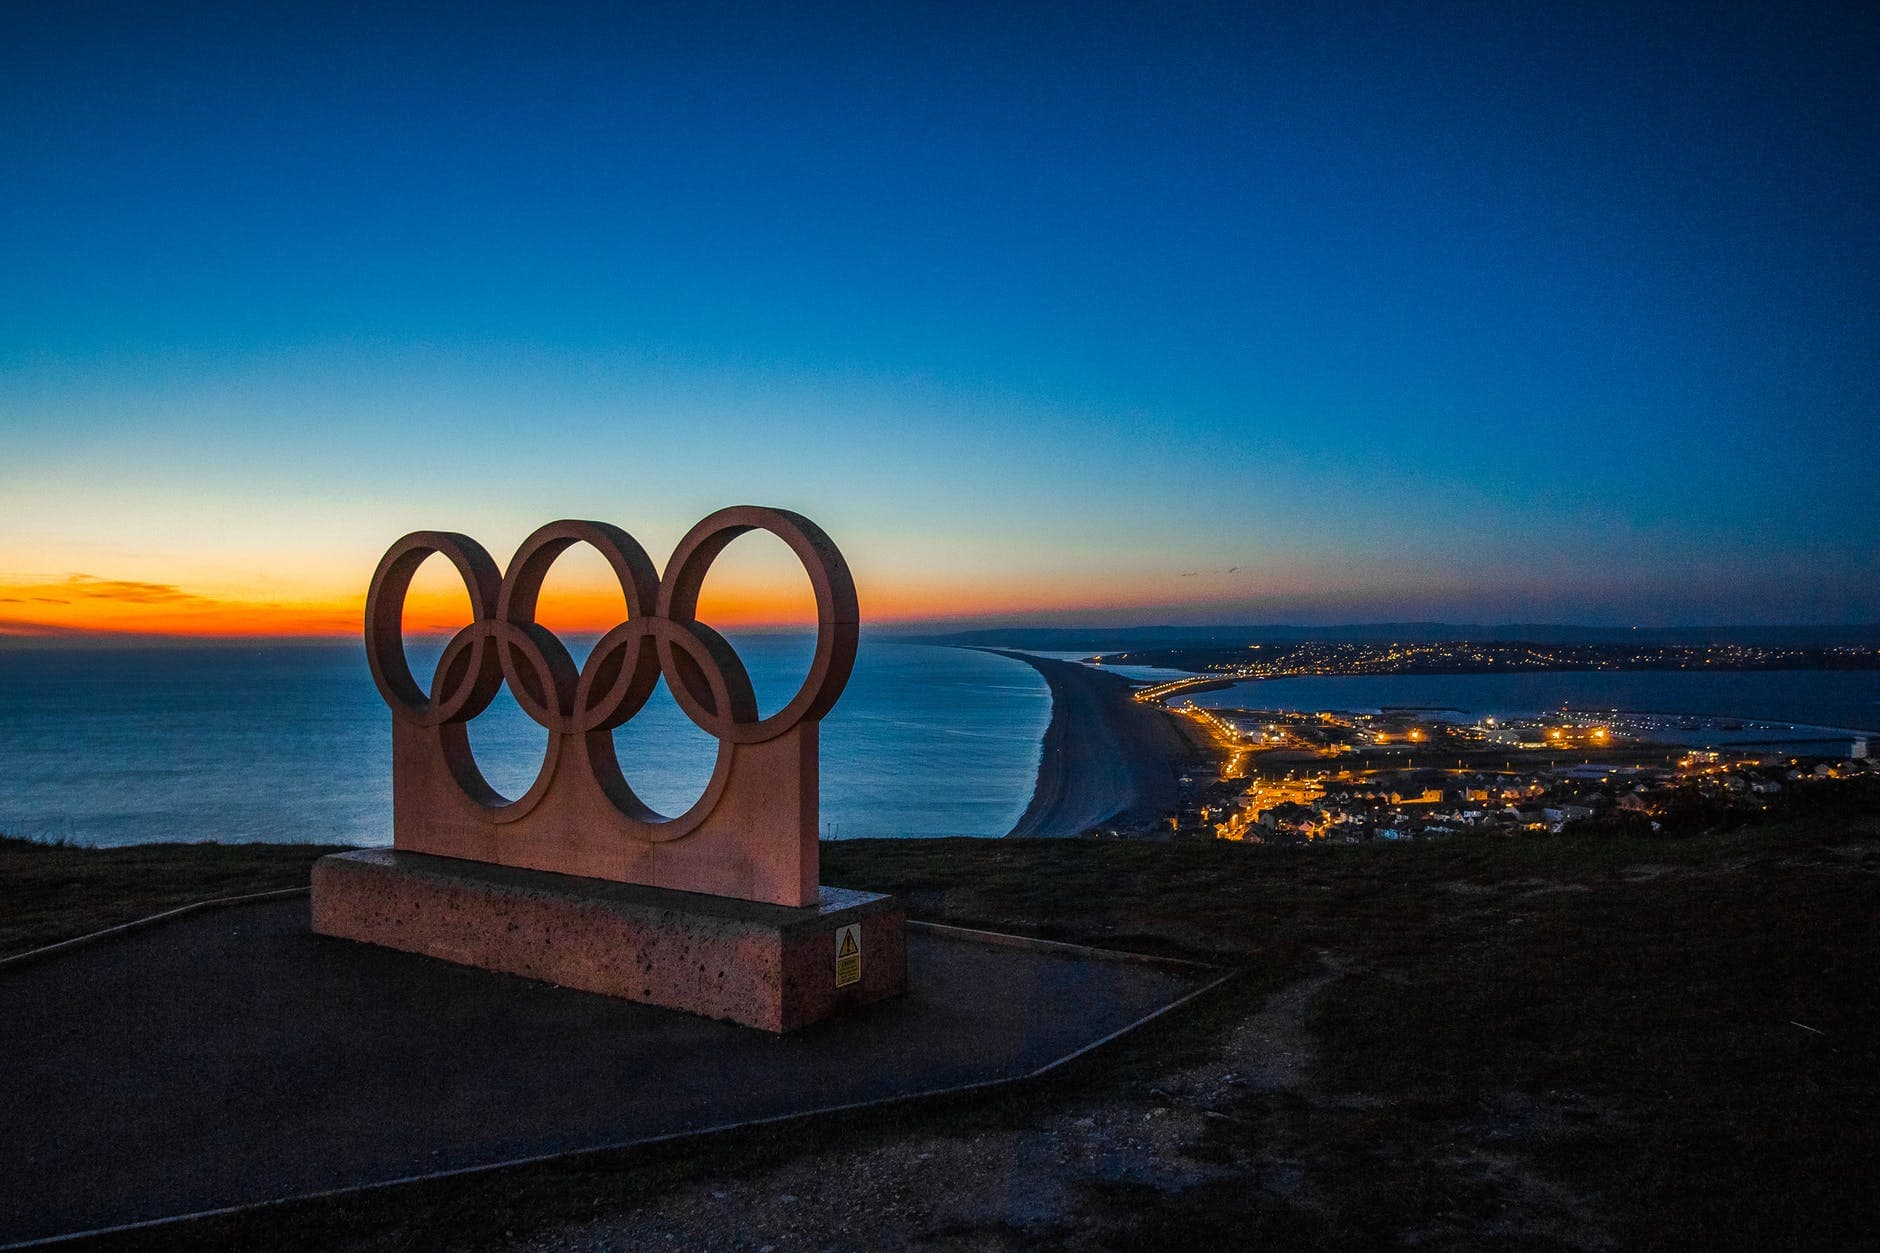 5 Olympic Rings with a lit up city in the background